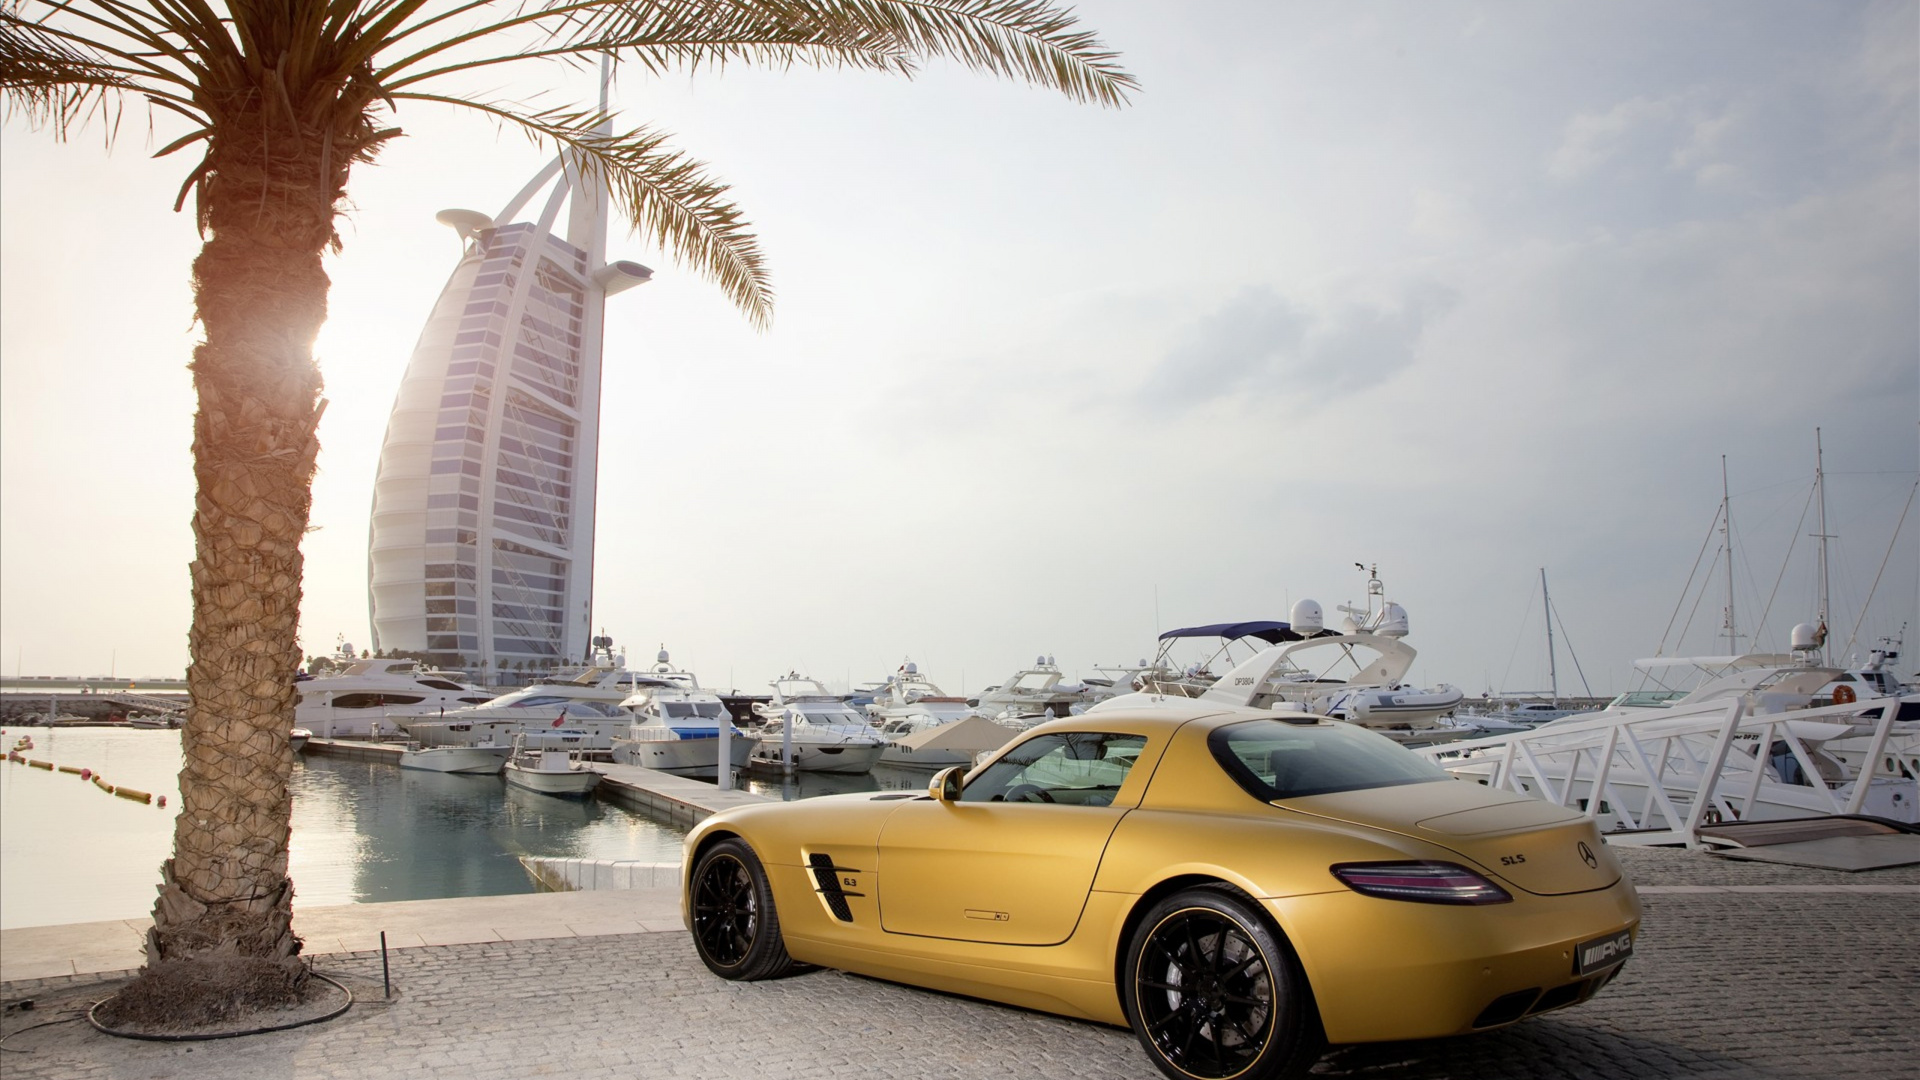 Yellow Porsche 911 Parked Near Palm Trees and Buildings During Daytime. Wallpaper in 1920x1080 Resolution